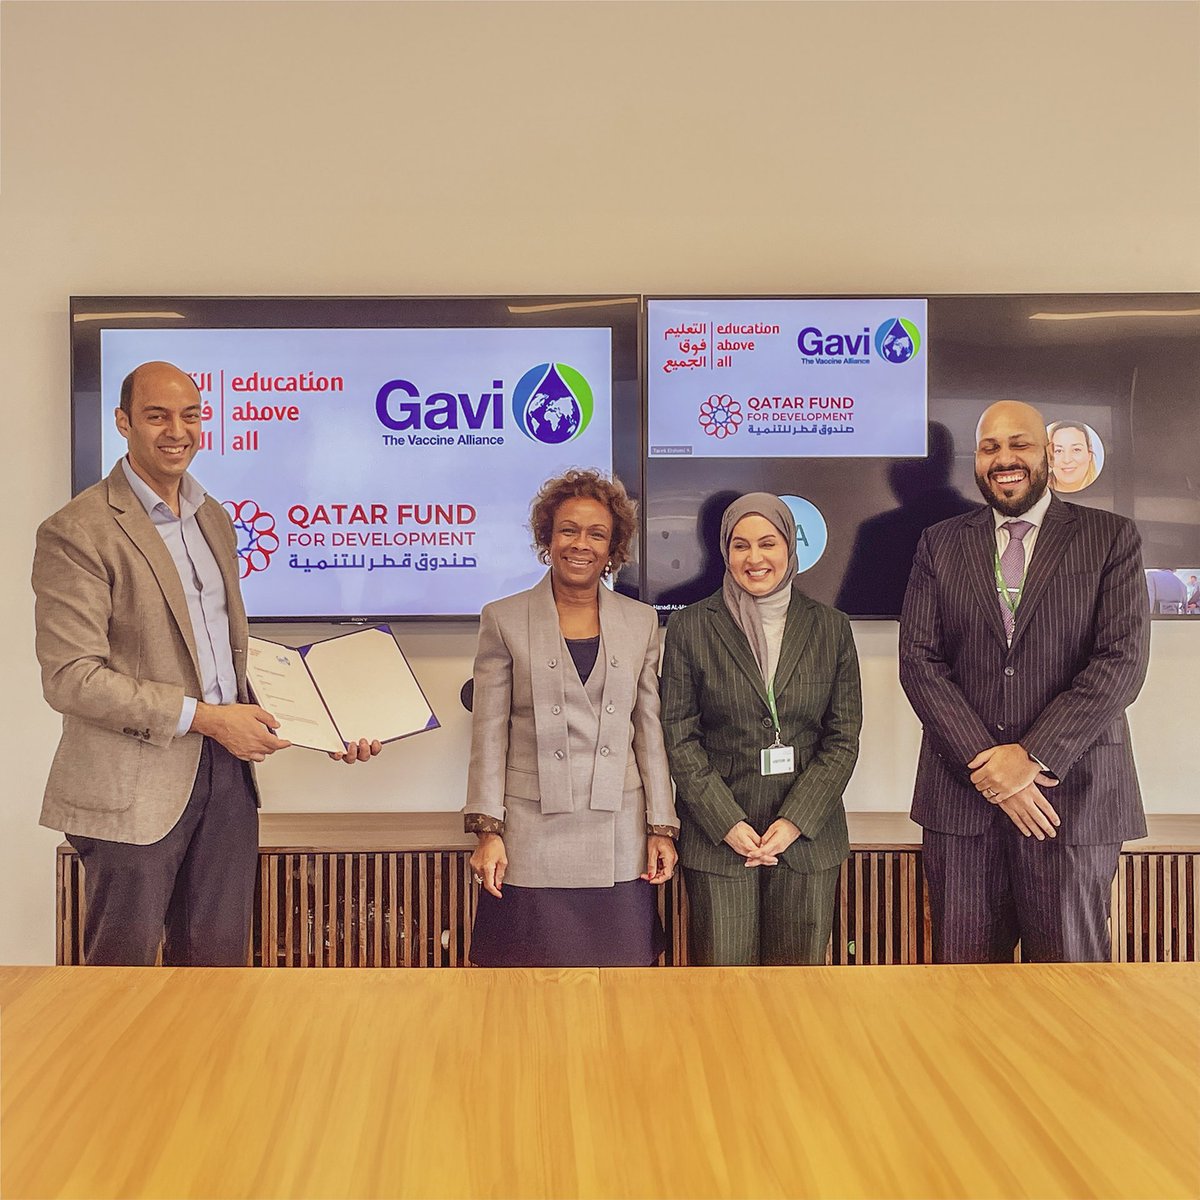 Thrilled to announce our impactful partnership with @gavi & @qatar_fund, dedicated to elevating immunization in 🇧🇩 and 🇵🇰. Our commitment spans 1,610,000 out of school children (OOSC), & communities. Join us as we make a difference in education and health! #LearnProtectThrive